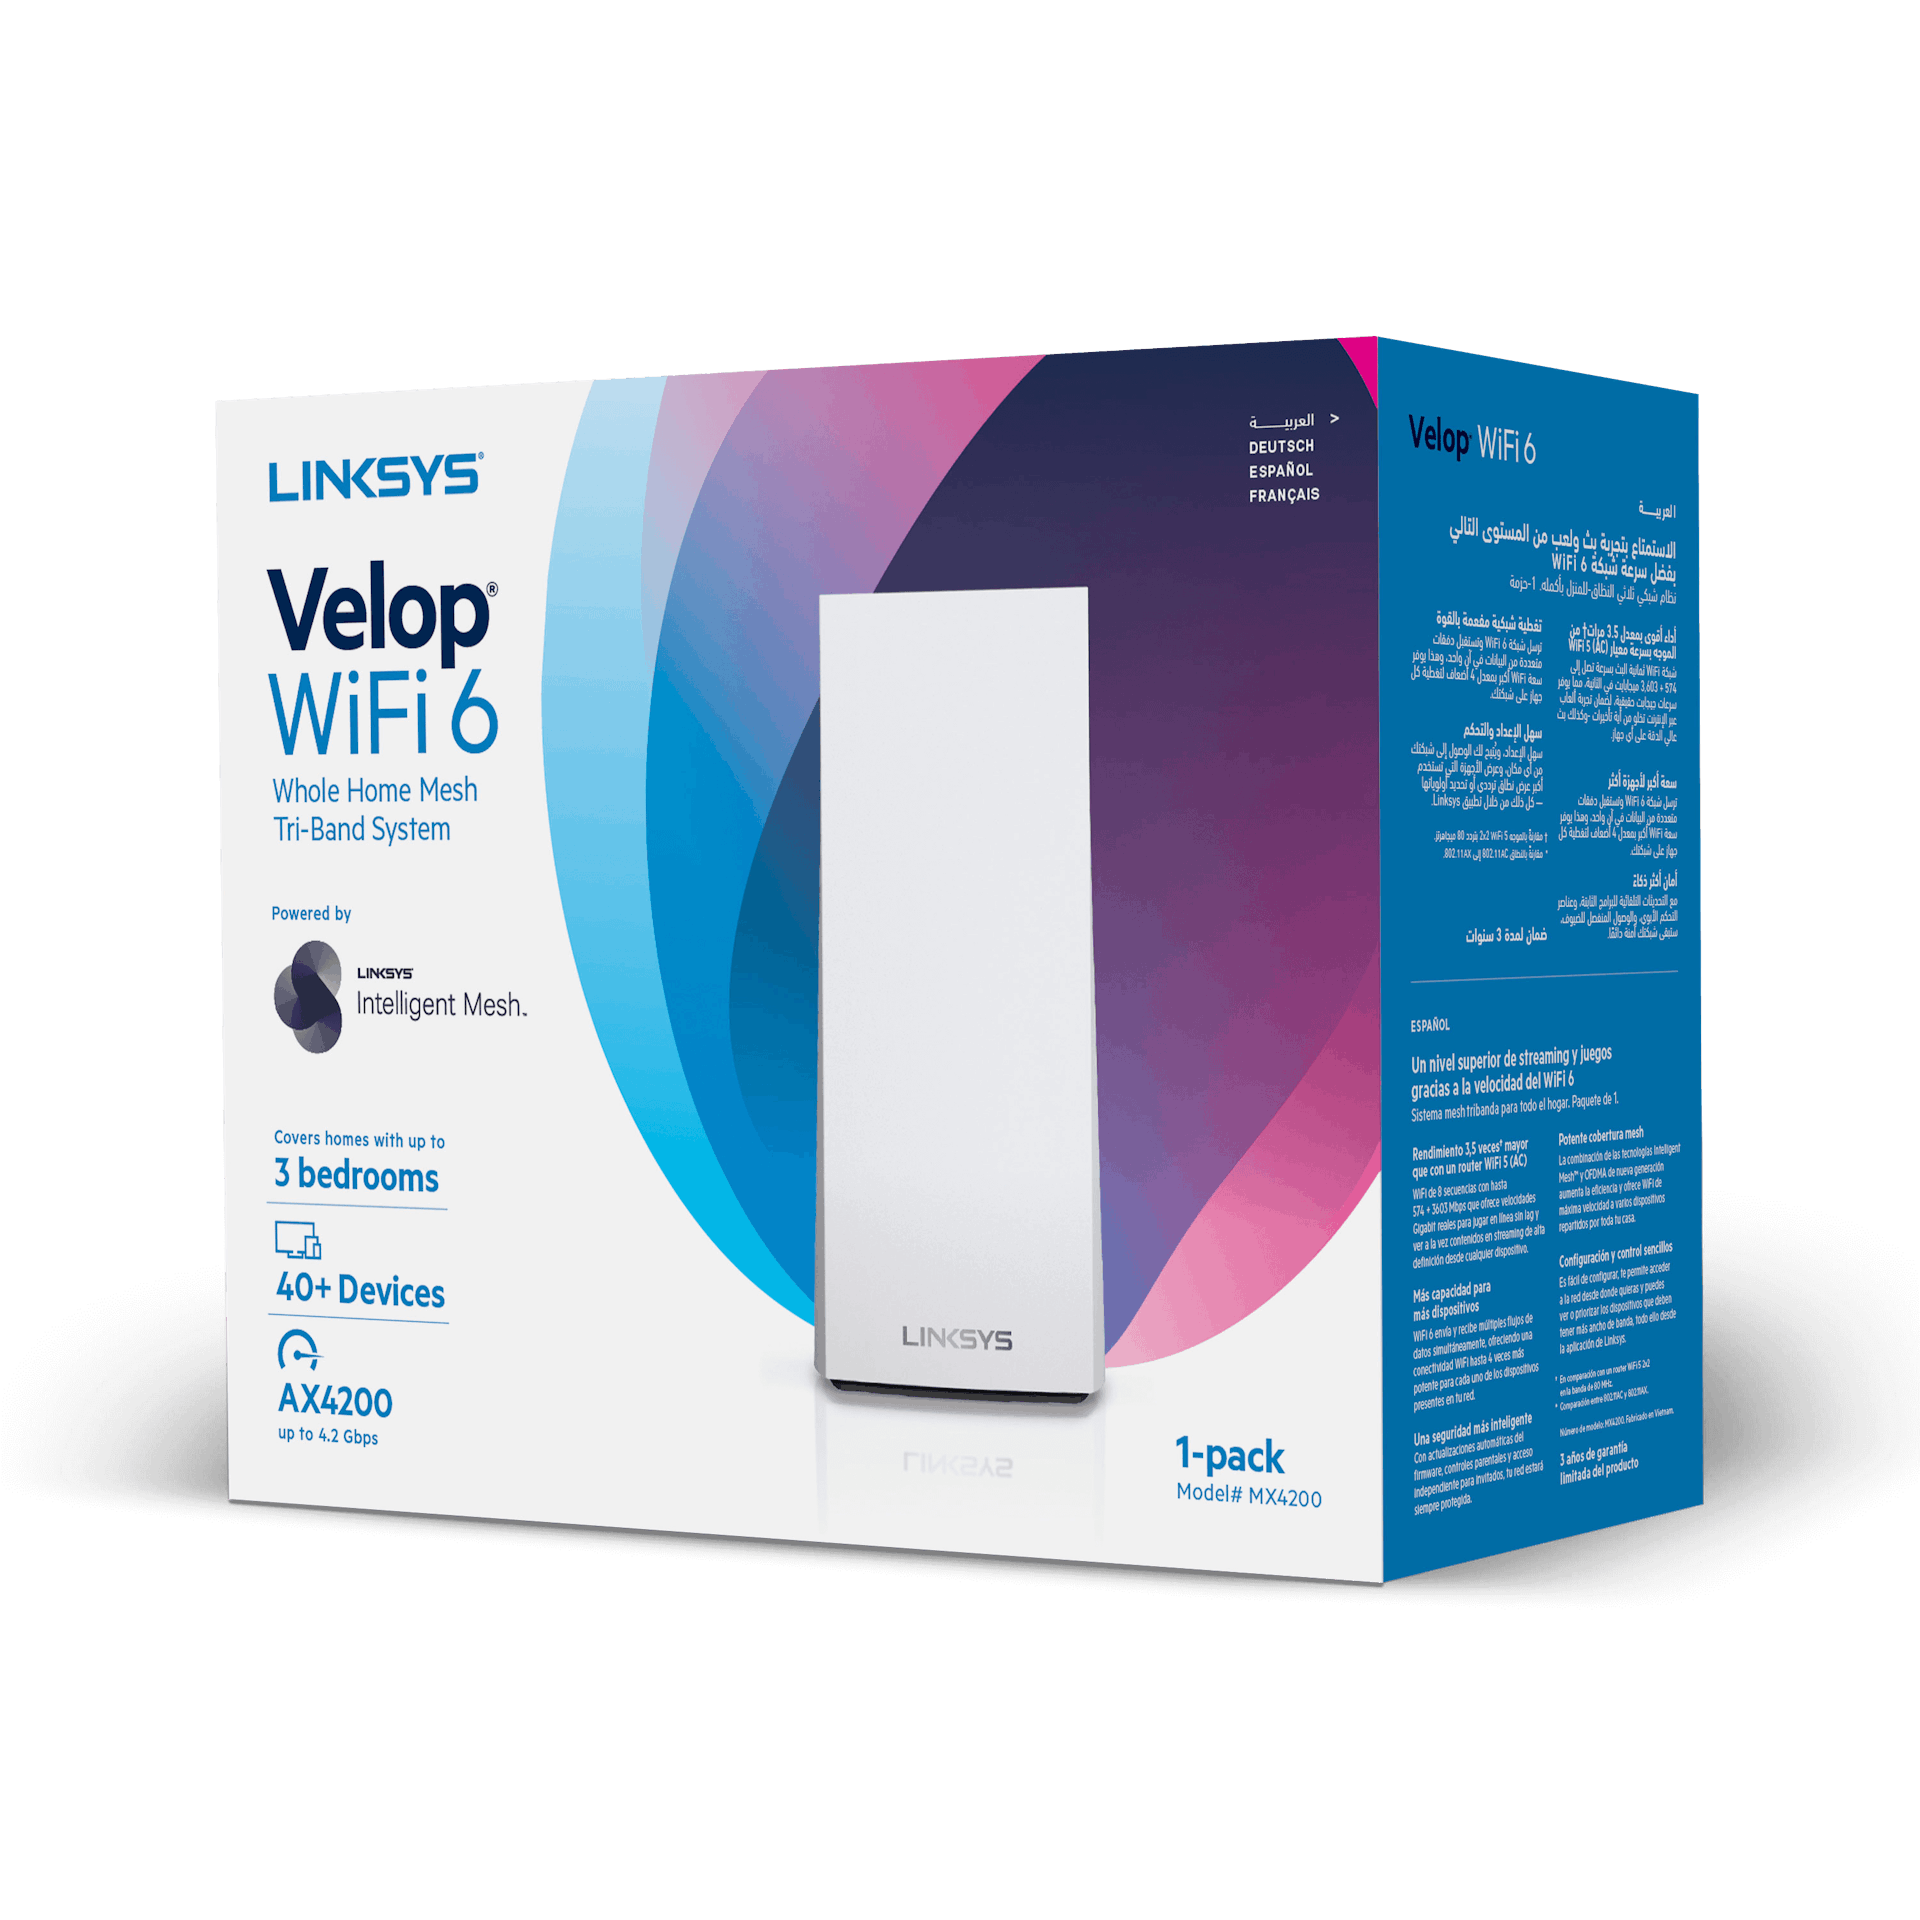 Linksys Velop WiFi MX4200 - Details - Packaging image